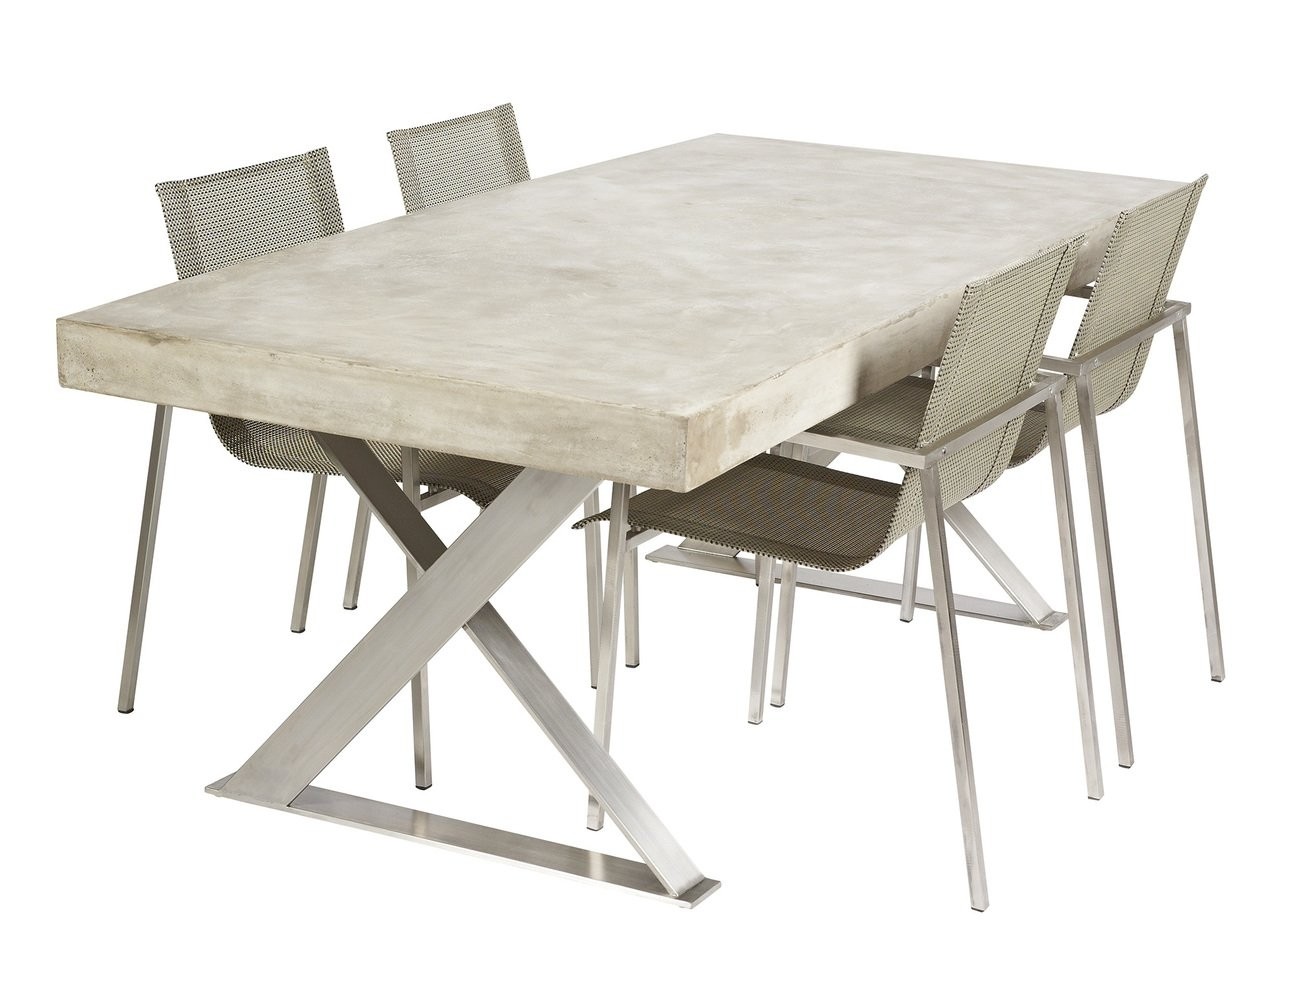 Stainless steel dinning table